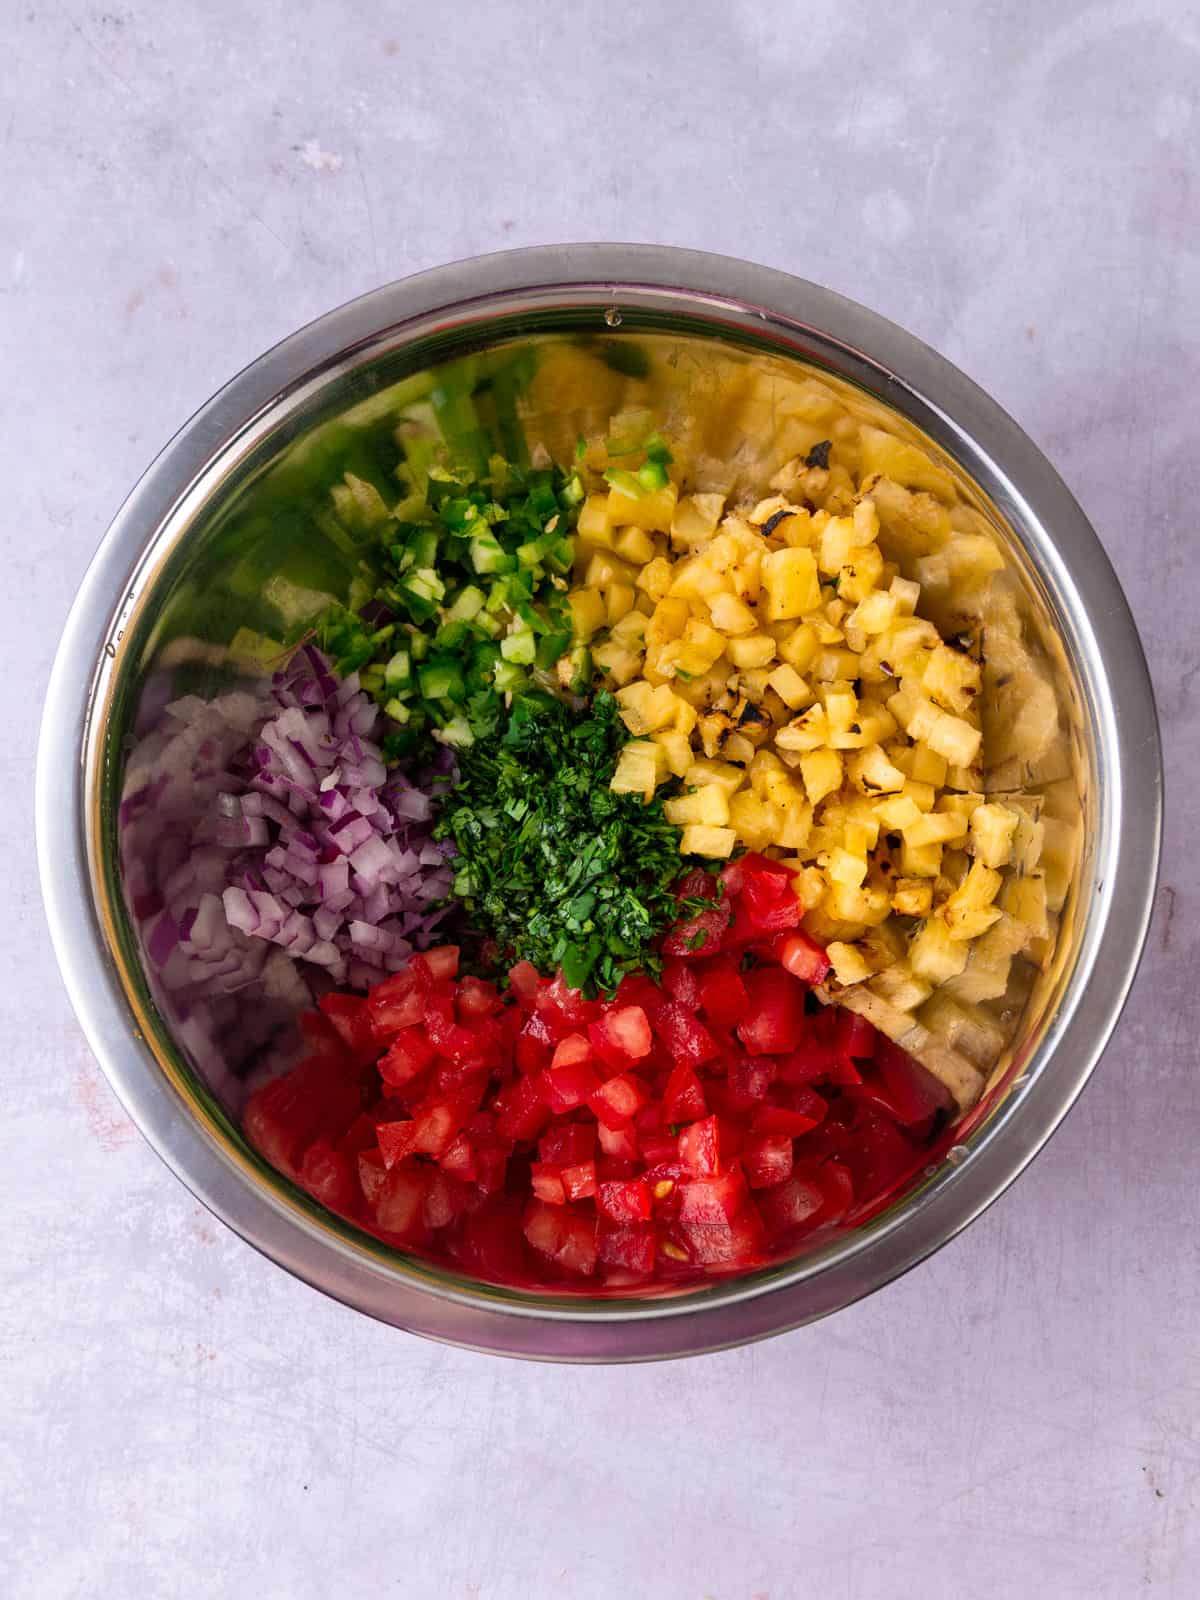 Add all of the pineapple pico de gallo ingredients to a bowl.